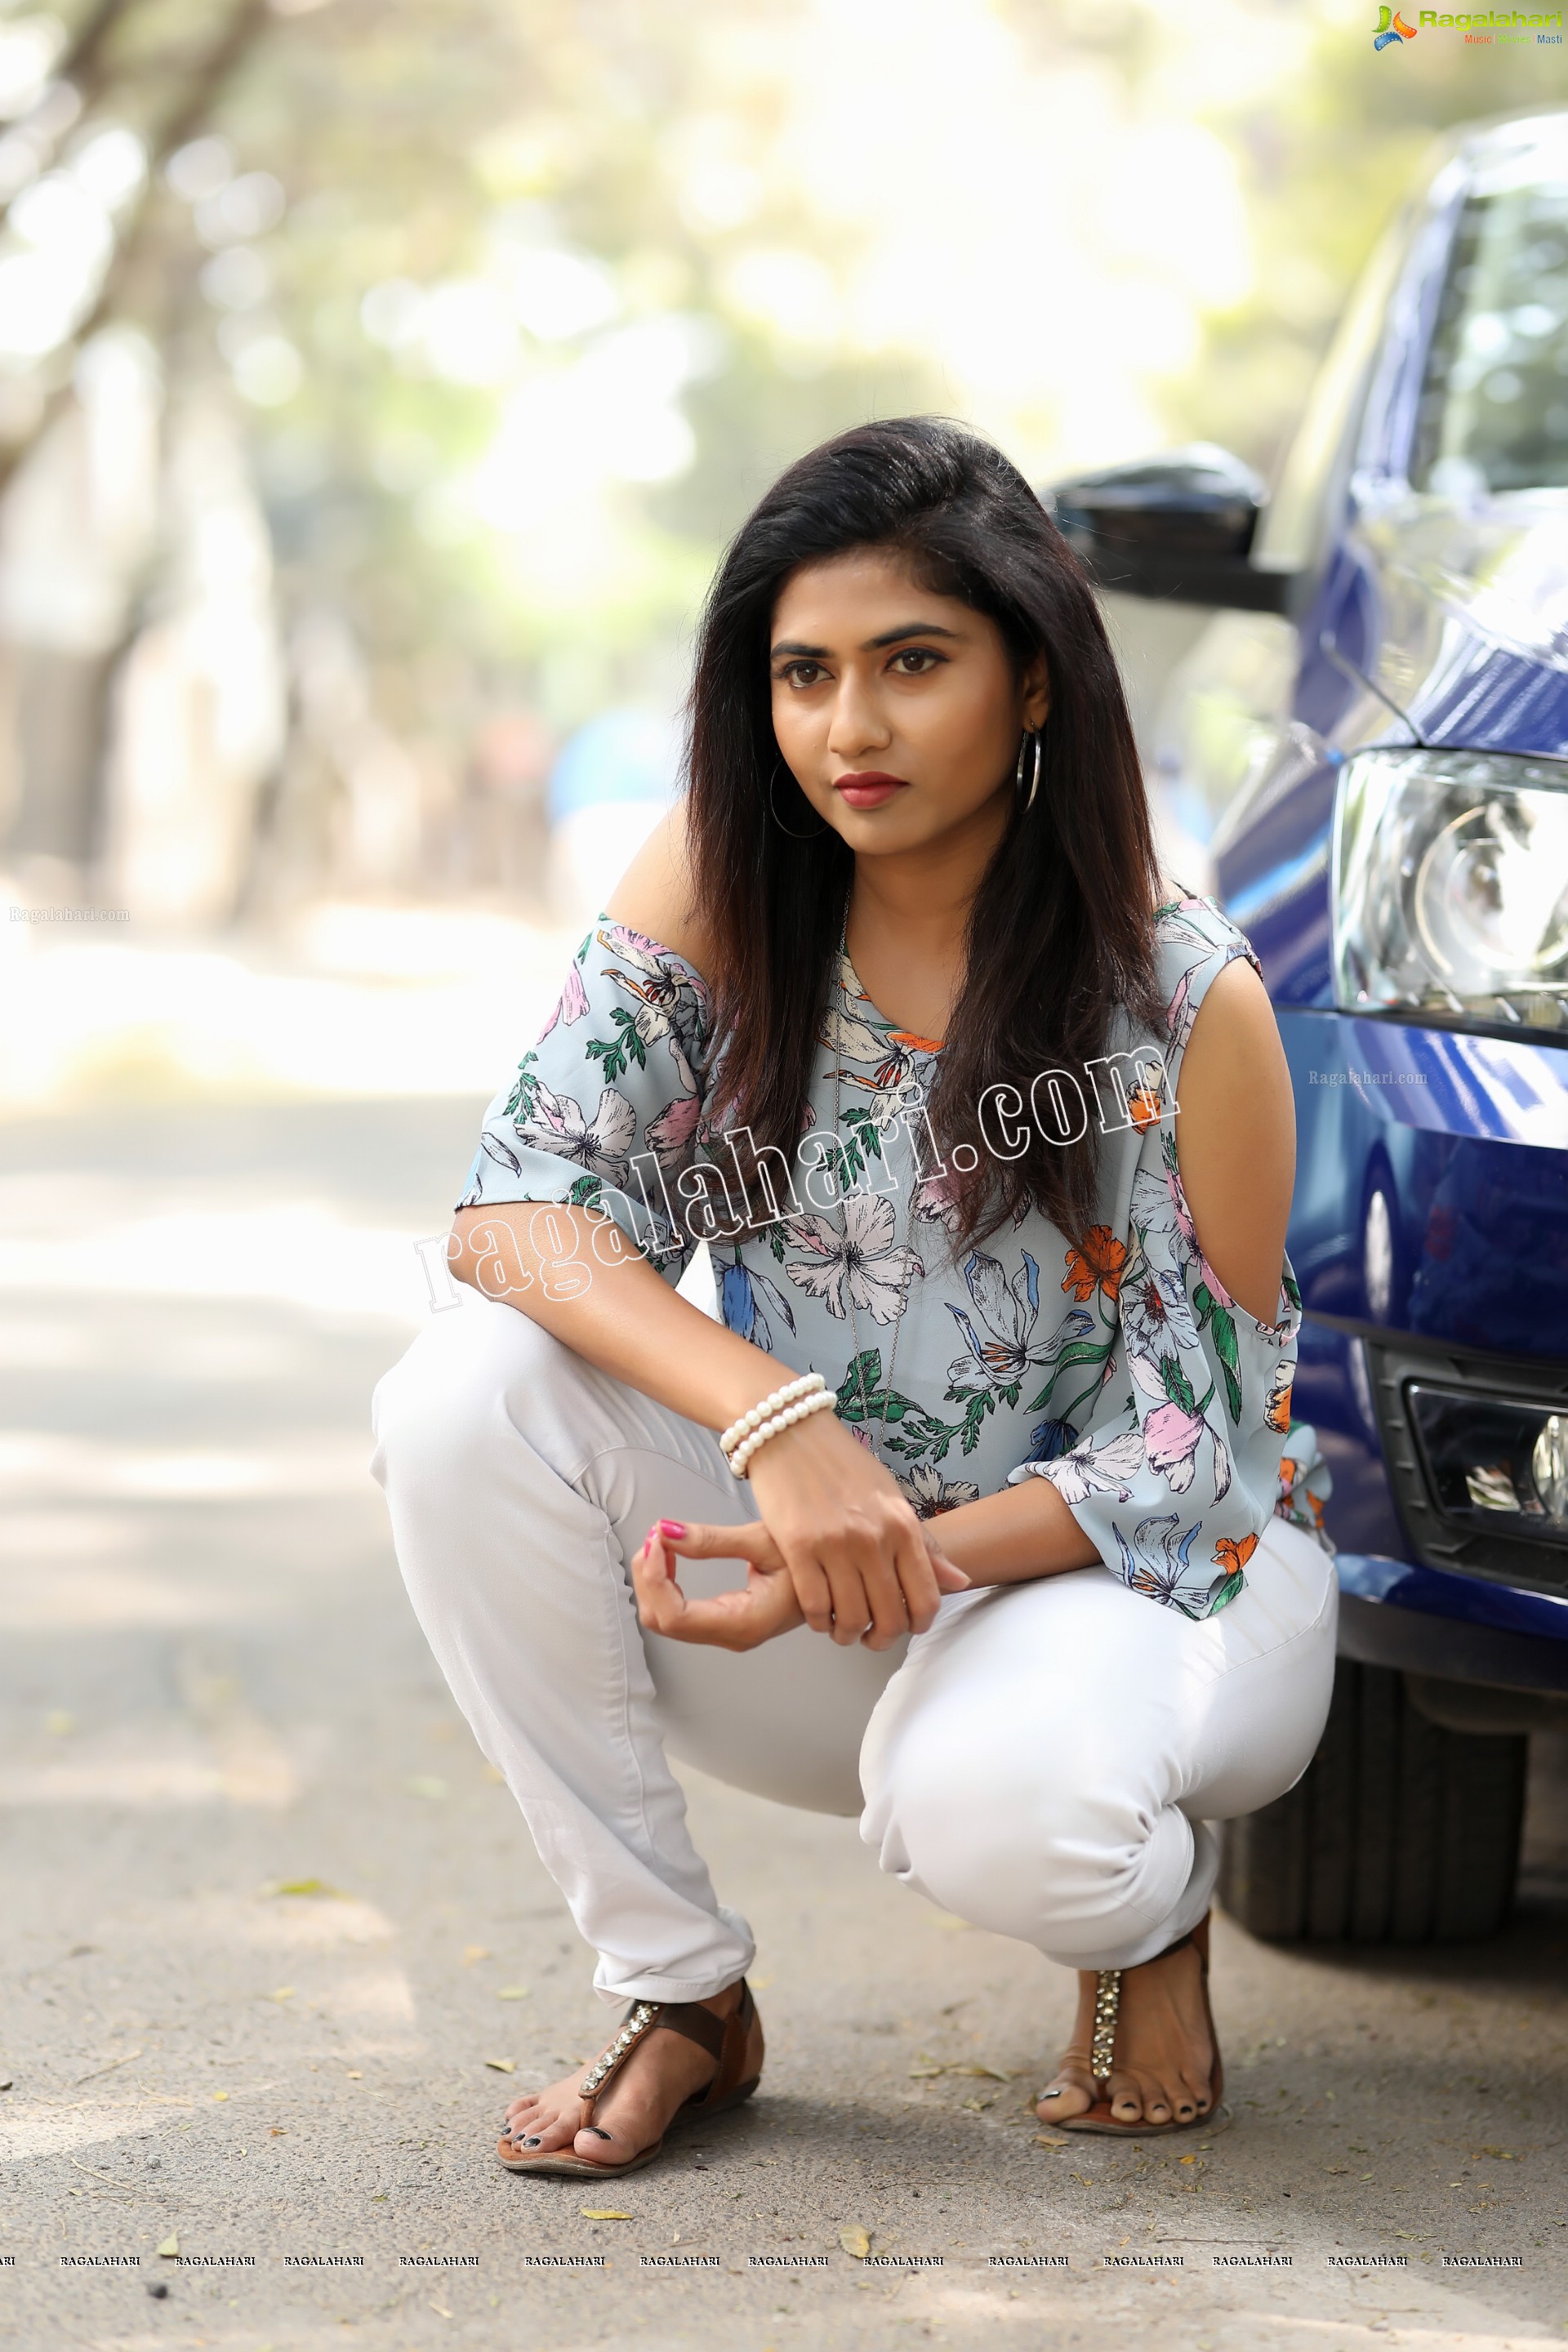 Raja Kumari YN in Pale Blue Floral Printed Top and White Jeans Exclusive Photo Shoot